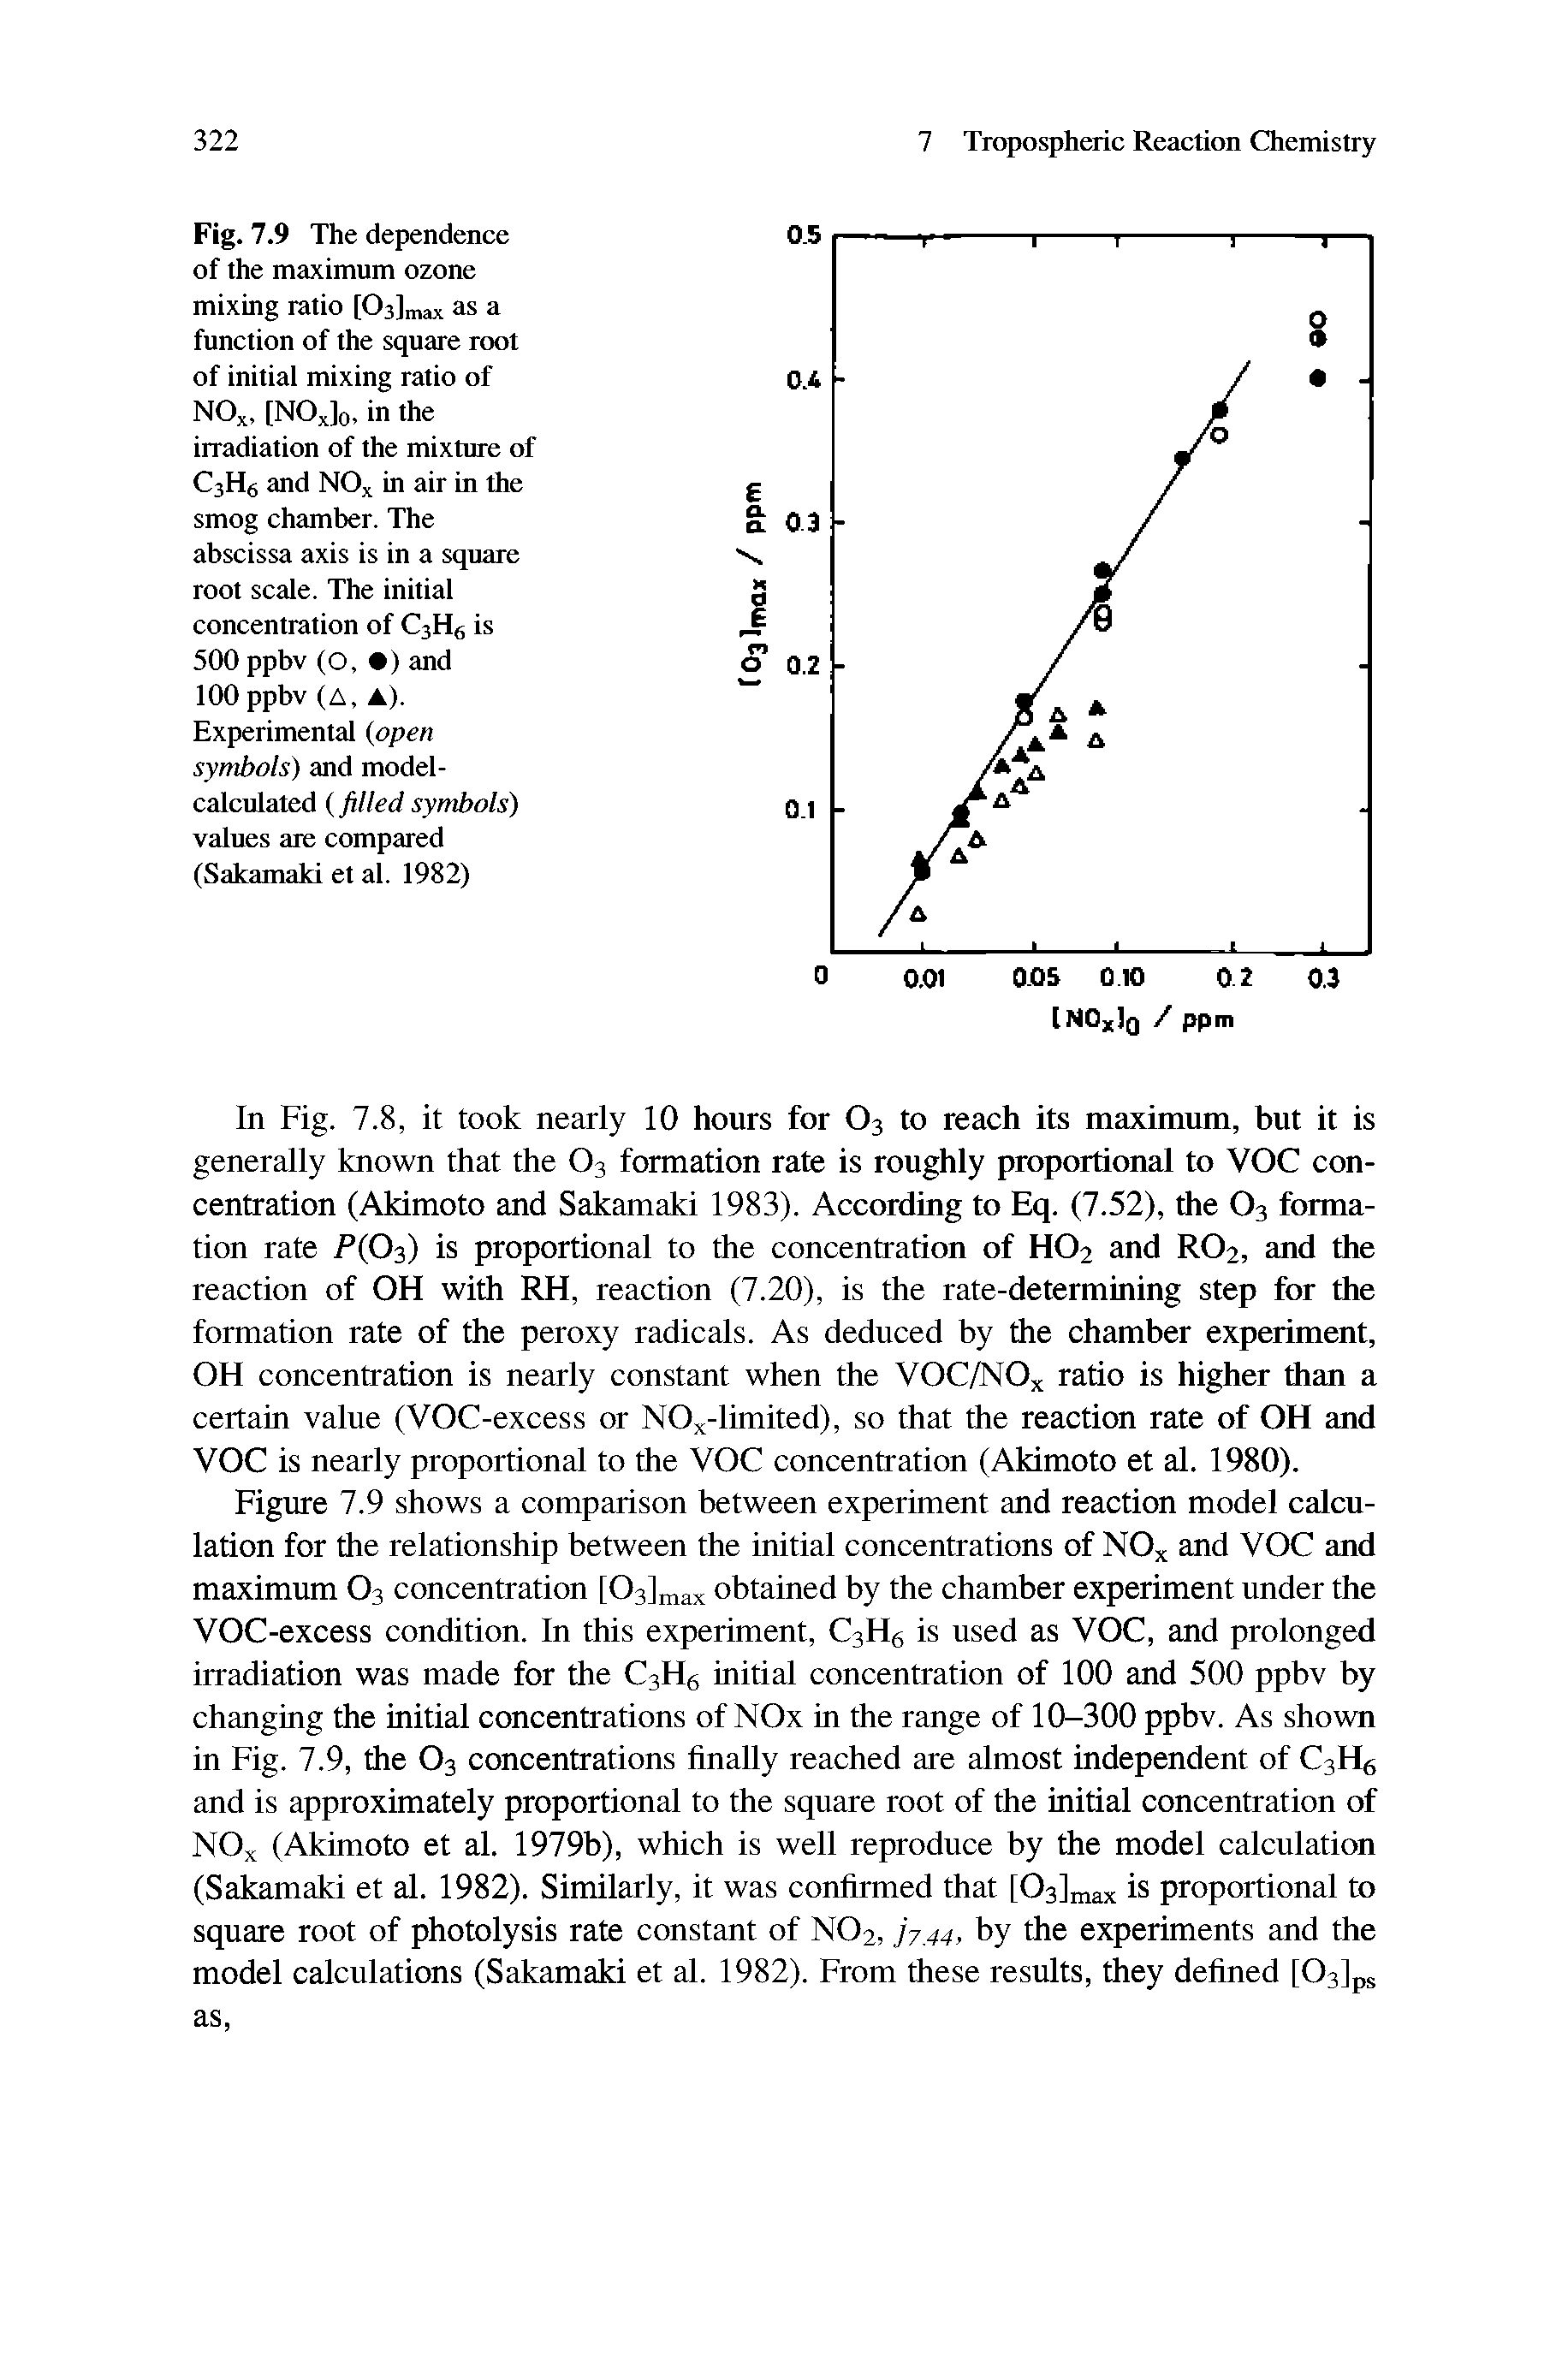 Fig. 7.9 The dependence of the maximum ozone mixing ratio [OaJmax as a function of the square root of initial mixing ratio of NOx, [NOxlo, in the irradiation of the mixture of CaHg and NO in air in the smog chamber. The abscissa axis is in a square root scale. The initial concentration of CaHg is 500 ppbv (O, ) and 100 ppbv (A, A). Experimental (open symbols) and model-calculated (filled symbols) values are compared (Sakamaki et al. 1982)...